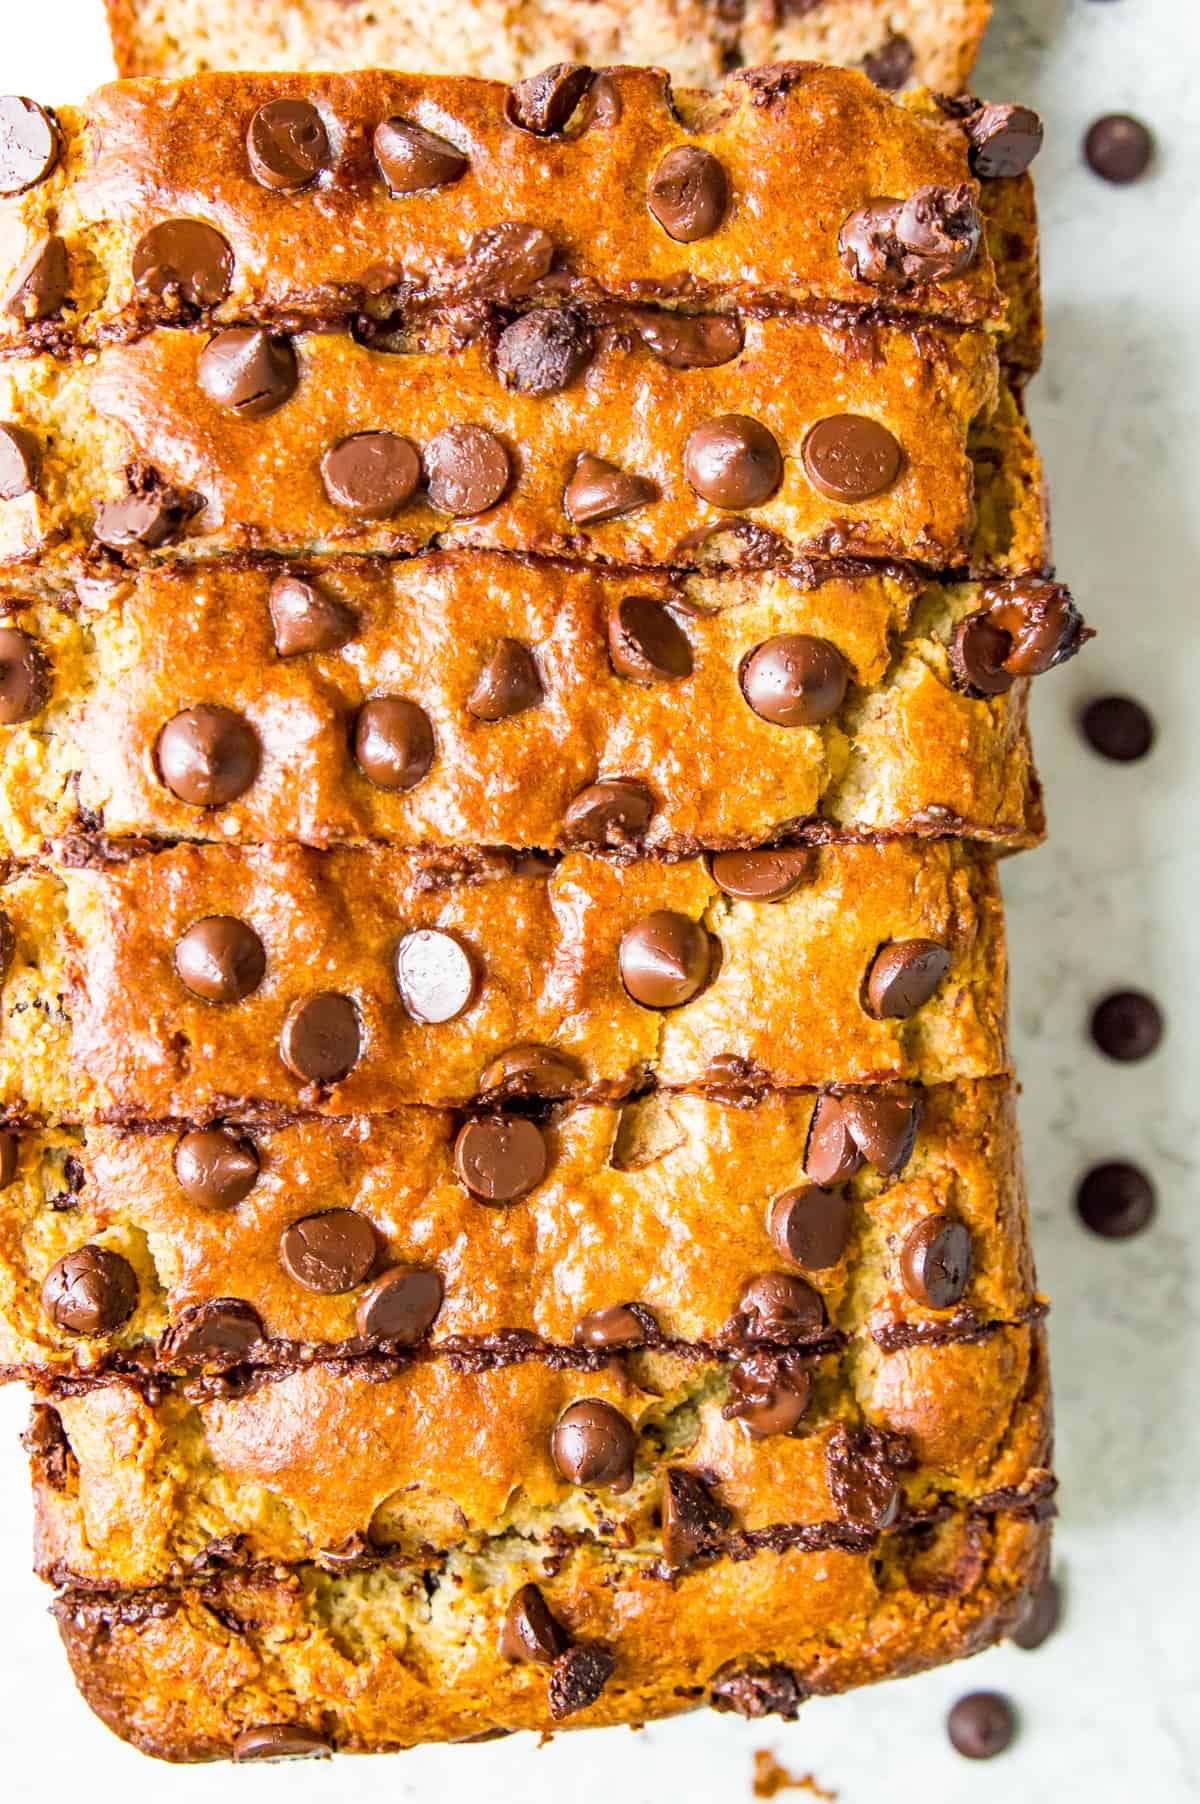 A loaf of chocolate chip banana bread cut into pieces with chocolate chips around it.